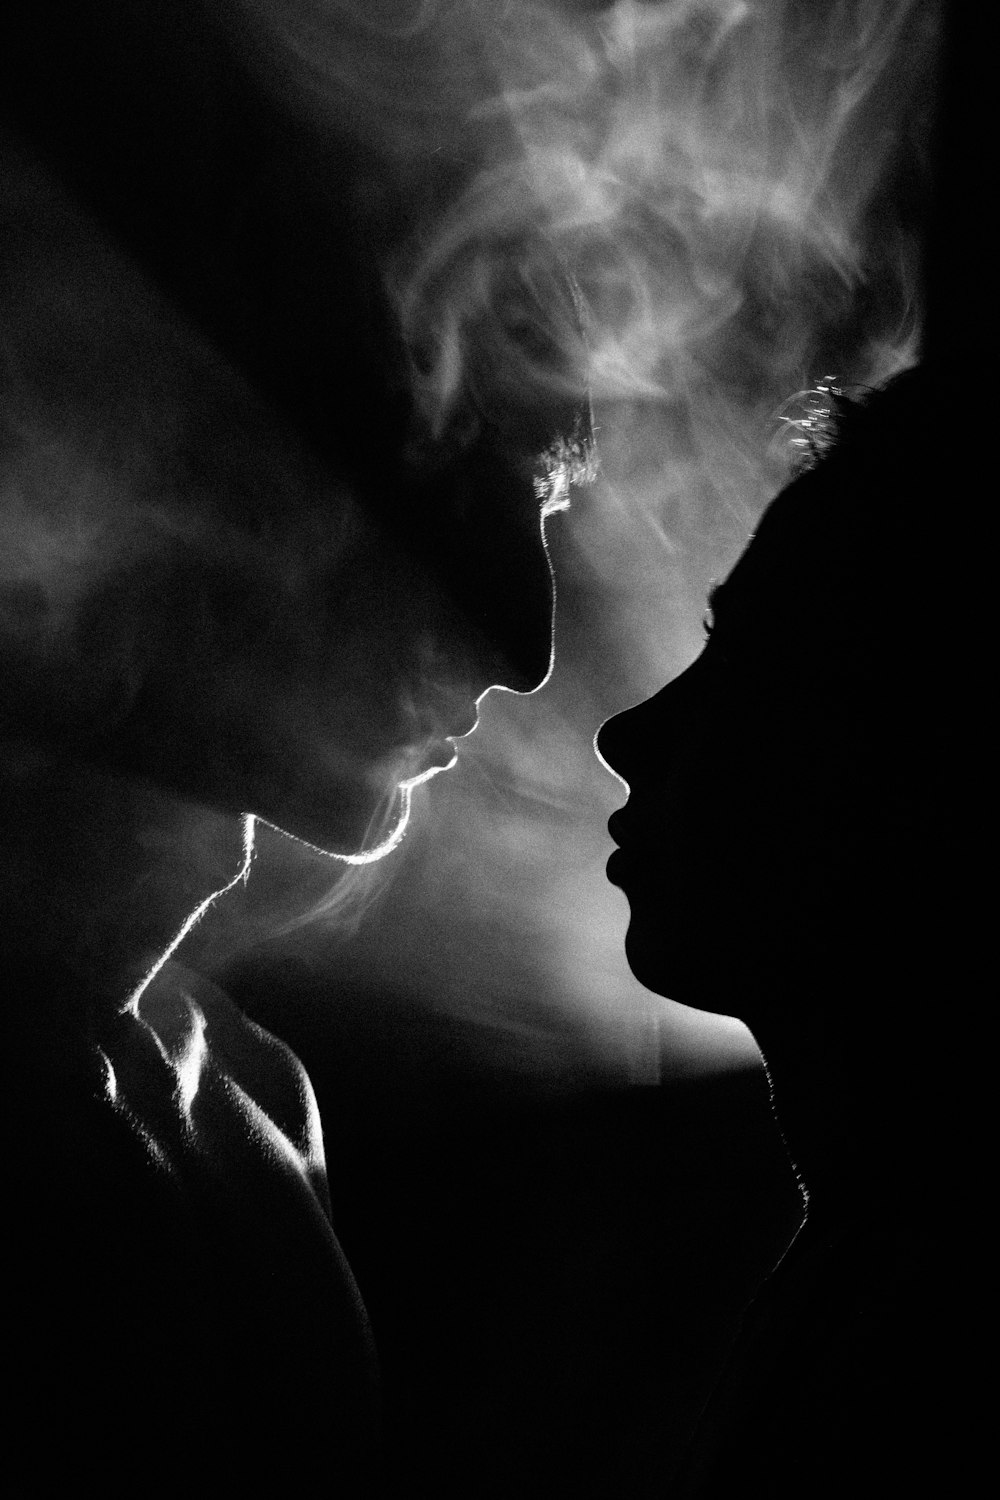 a black and white photo of a woman smoking a cigarette